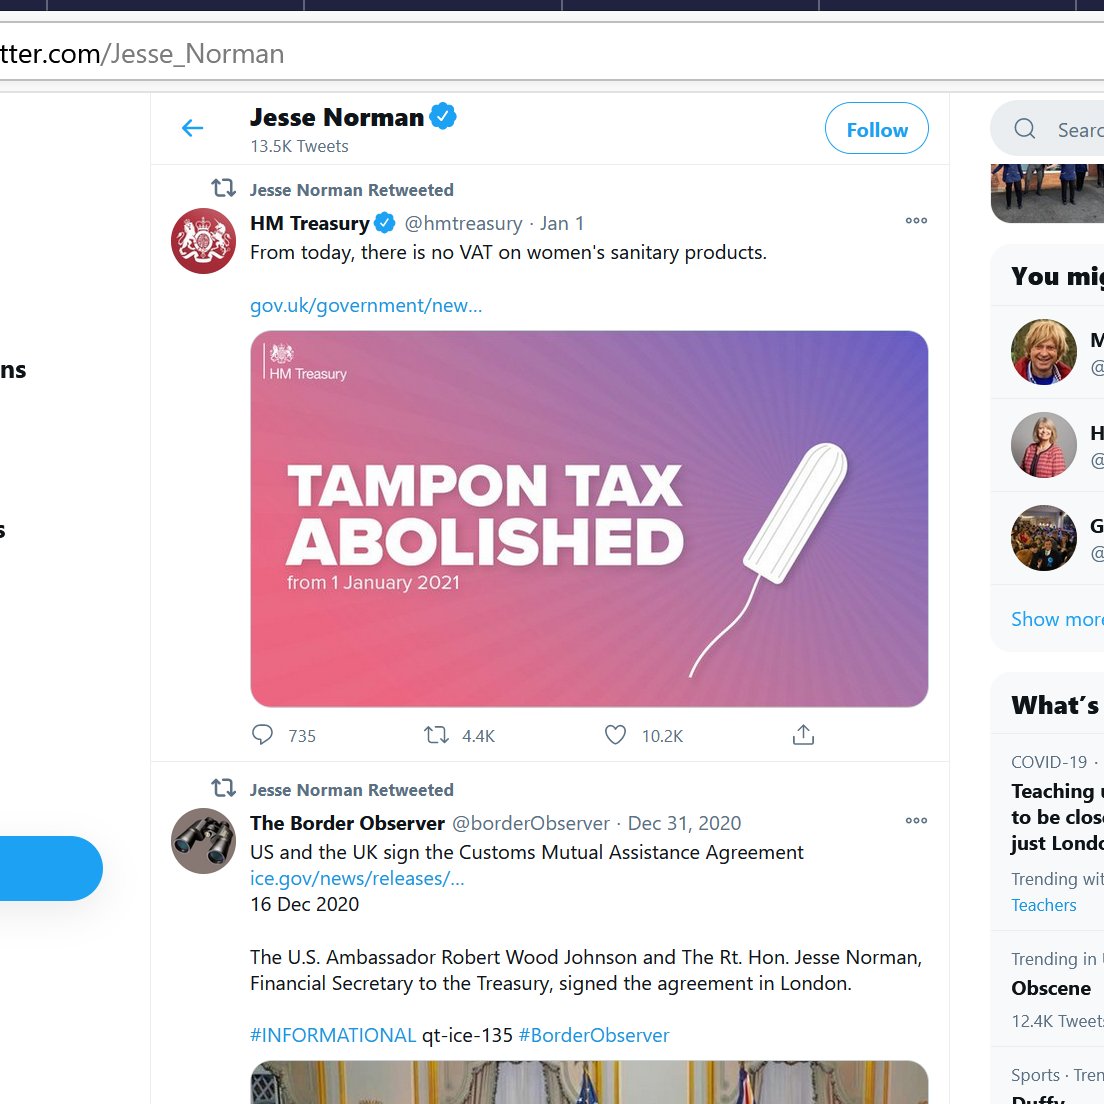 Jesse Norman, Conservative MP for Hereford and South Herefordshire, has retweeted the treasury tweet about the tampon tax being abolished. Why did he vote against the abolition in 2015?